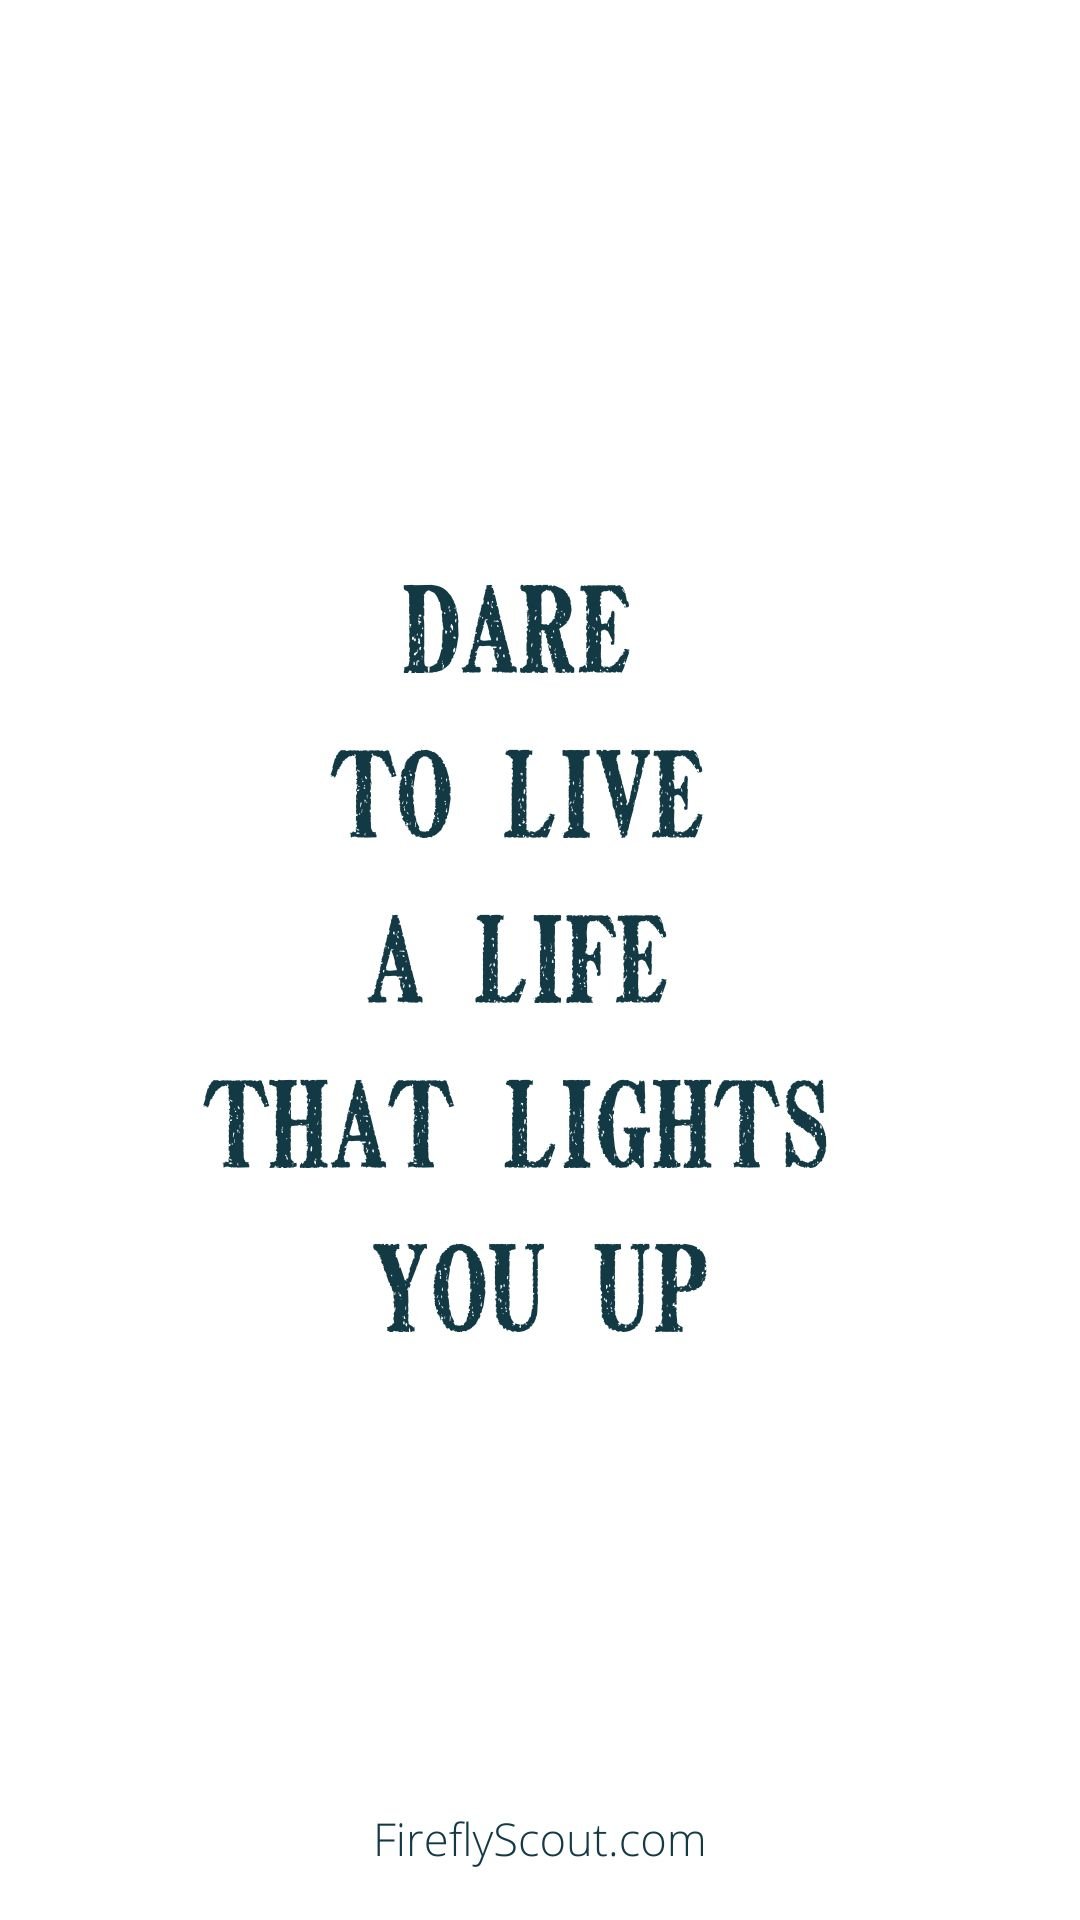 Dare to live a life that lights you up